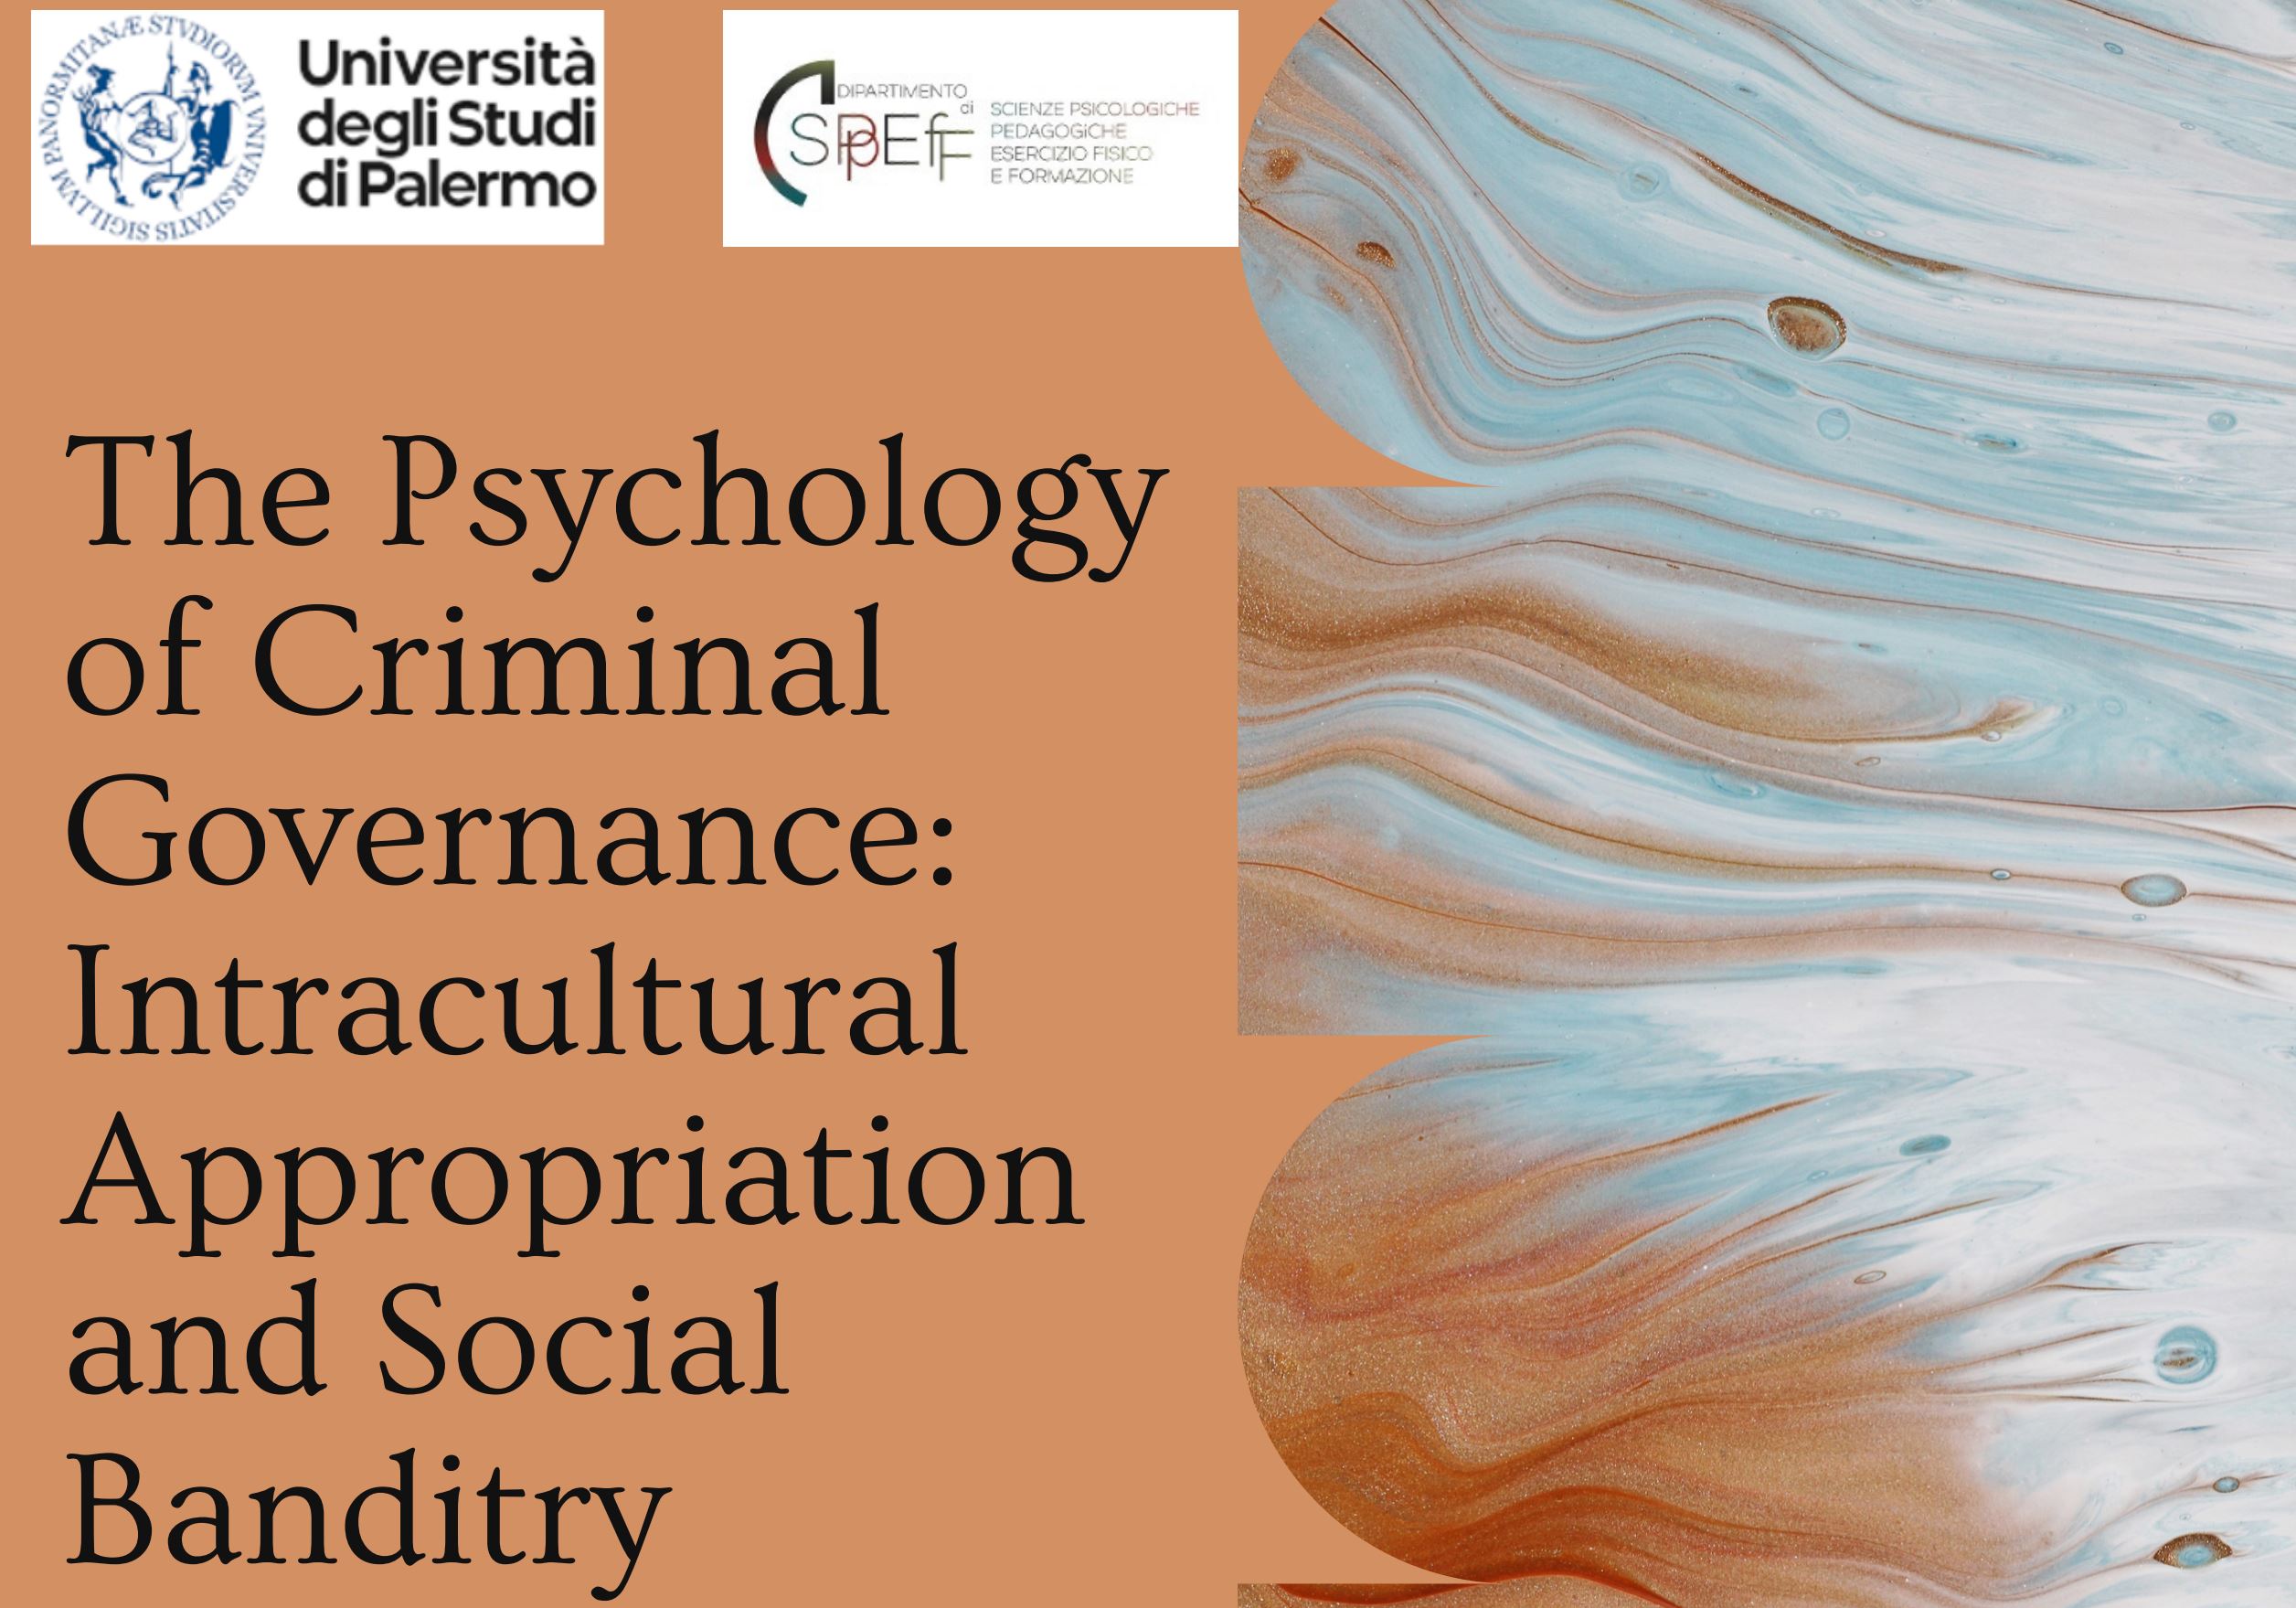 The Psychology of Criminal Governance: Intracultural Appropriation and Social Banditry